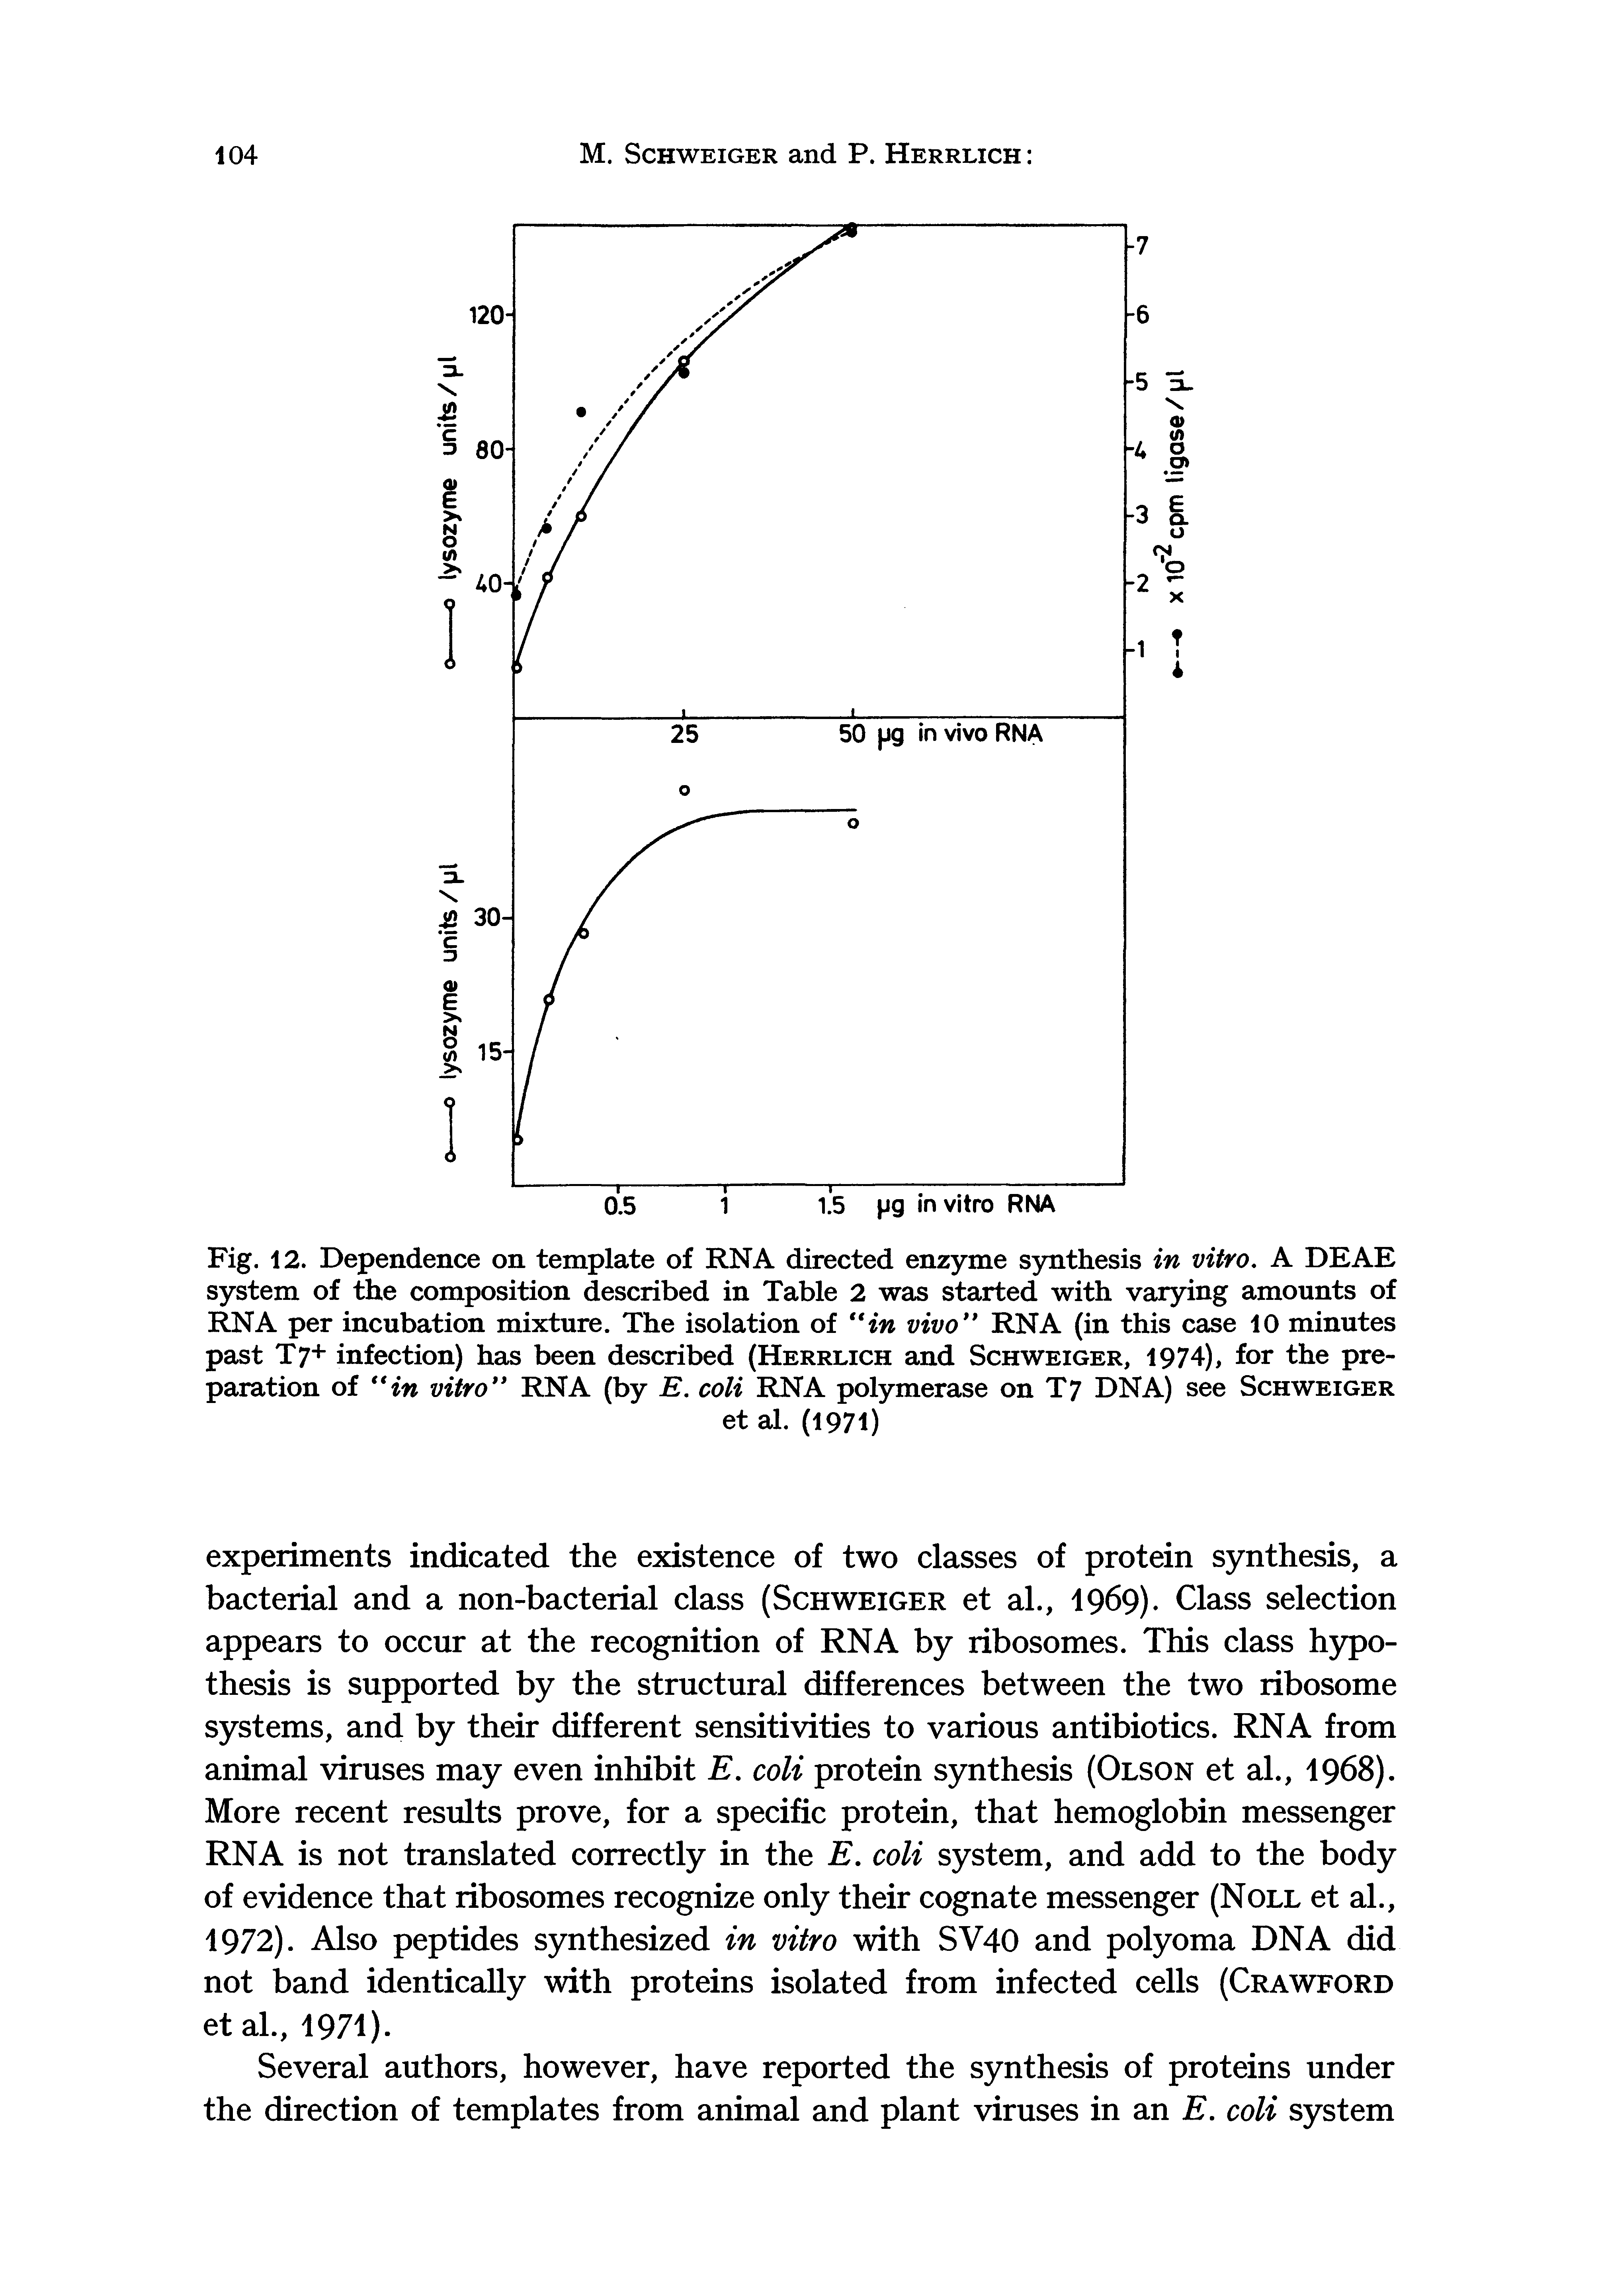 Fig. 12. Dependence on template of RNA directed enzyme synthesis in vitro, A DEAE system of the composition described in Table 2 was started with varying amounts of RNA per incubation mixture. The isolation of in vivo RNA (in this case 10 minutes past T7+ infection) has been described (Herrlich and Schweiger, 1974), for the preparation of in vitro RNA (by E. coli RNA polymerase on T7 DNA) see Schweiger...